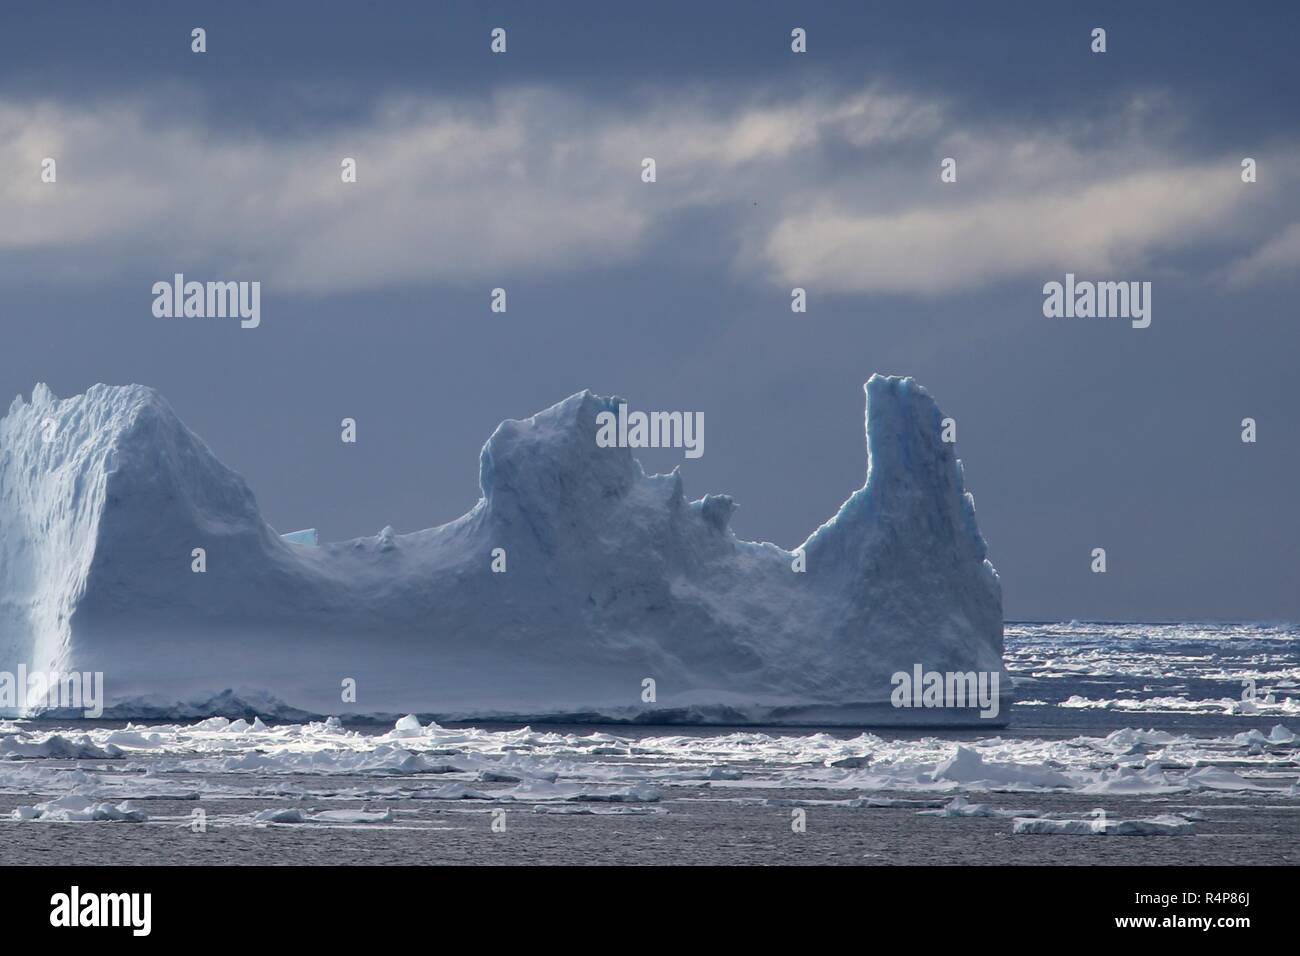 (181128) -- ABOARD XUELONG, Nov. 28, 2018 (Xinhua) -- Photo taken on Nov. 27, 2018 shows iceberg seen from China's research icebreaker Xuelong in a floating ice area in Southern Ocean. China's research icebreaker Xuelong has entered a floating ice area in the Southern Ocean to avoid a cyclone. It is scheduled to reach the Zhongshan Station in Antarctica on Nov. 30. Also known as the Snow Dragon, the icebreaker carrying a research team set sail from Shanghai on Nov. 2, beginning the country's 35th Antarctic expedition which will last 162 days and cover 37,000 nautical miles (68,500 km). (Xinhua Stock Photo